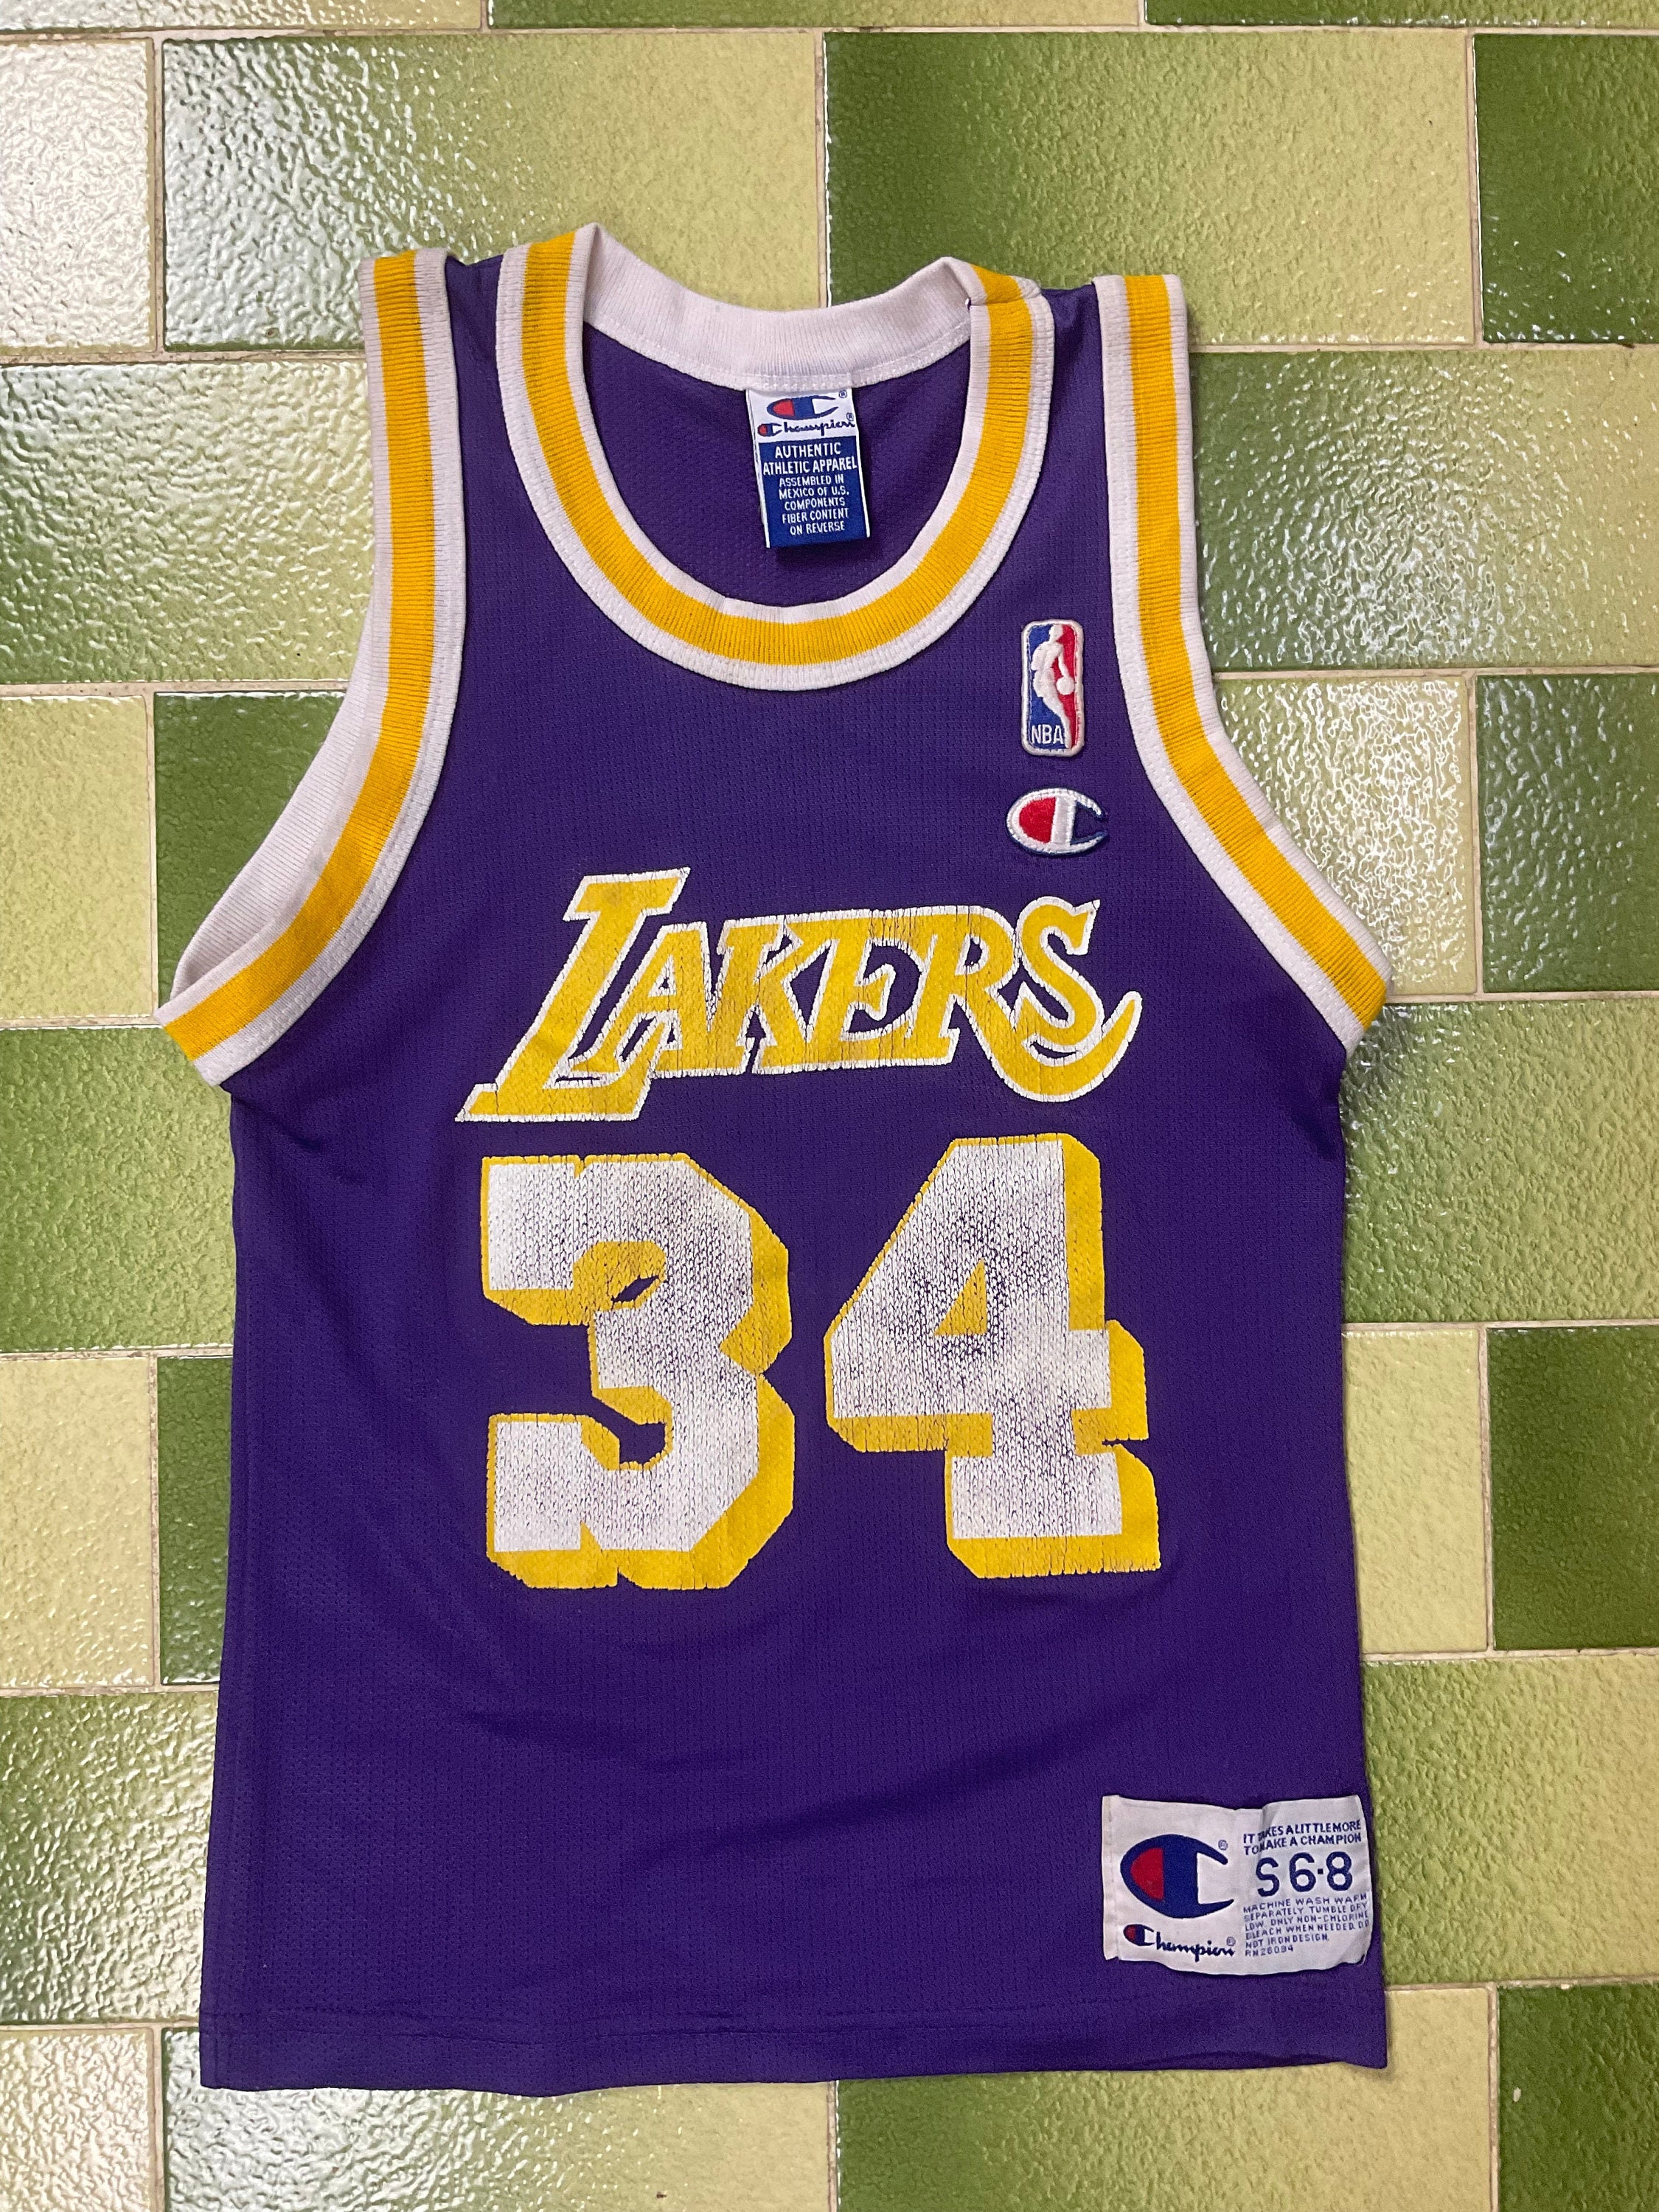 Shaquille O'Neal Los Angeles Lakers NBA XL Links Marketing Group